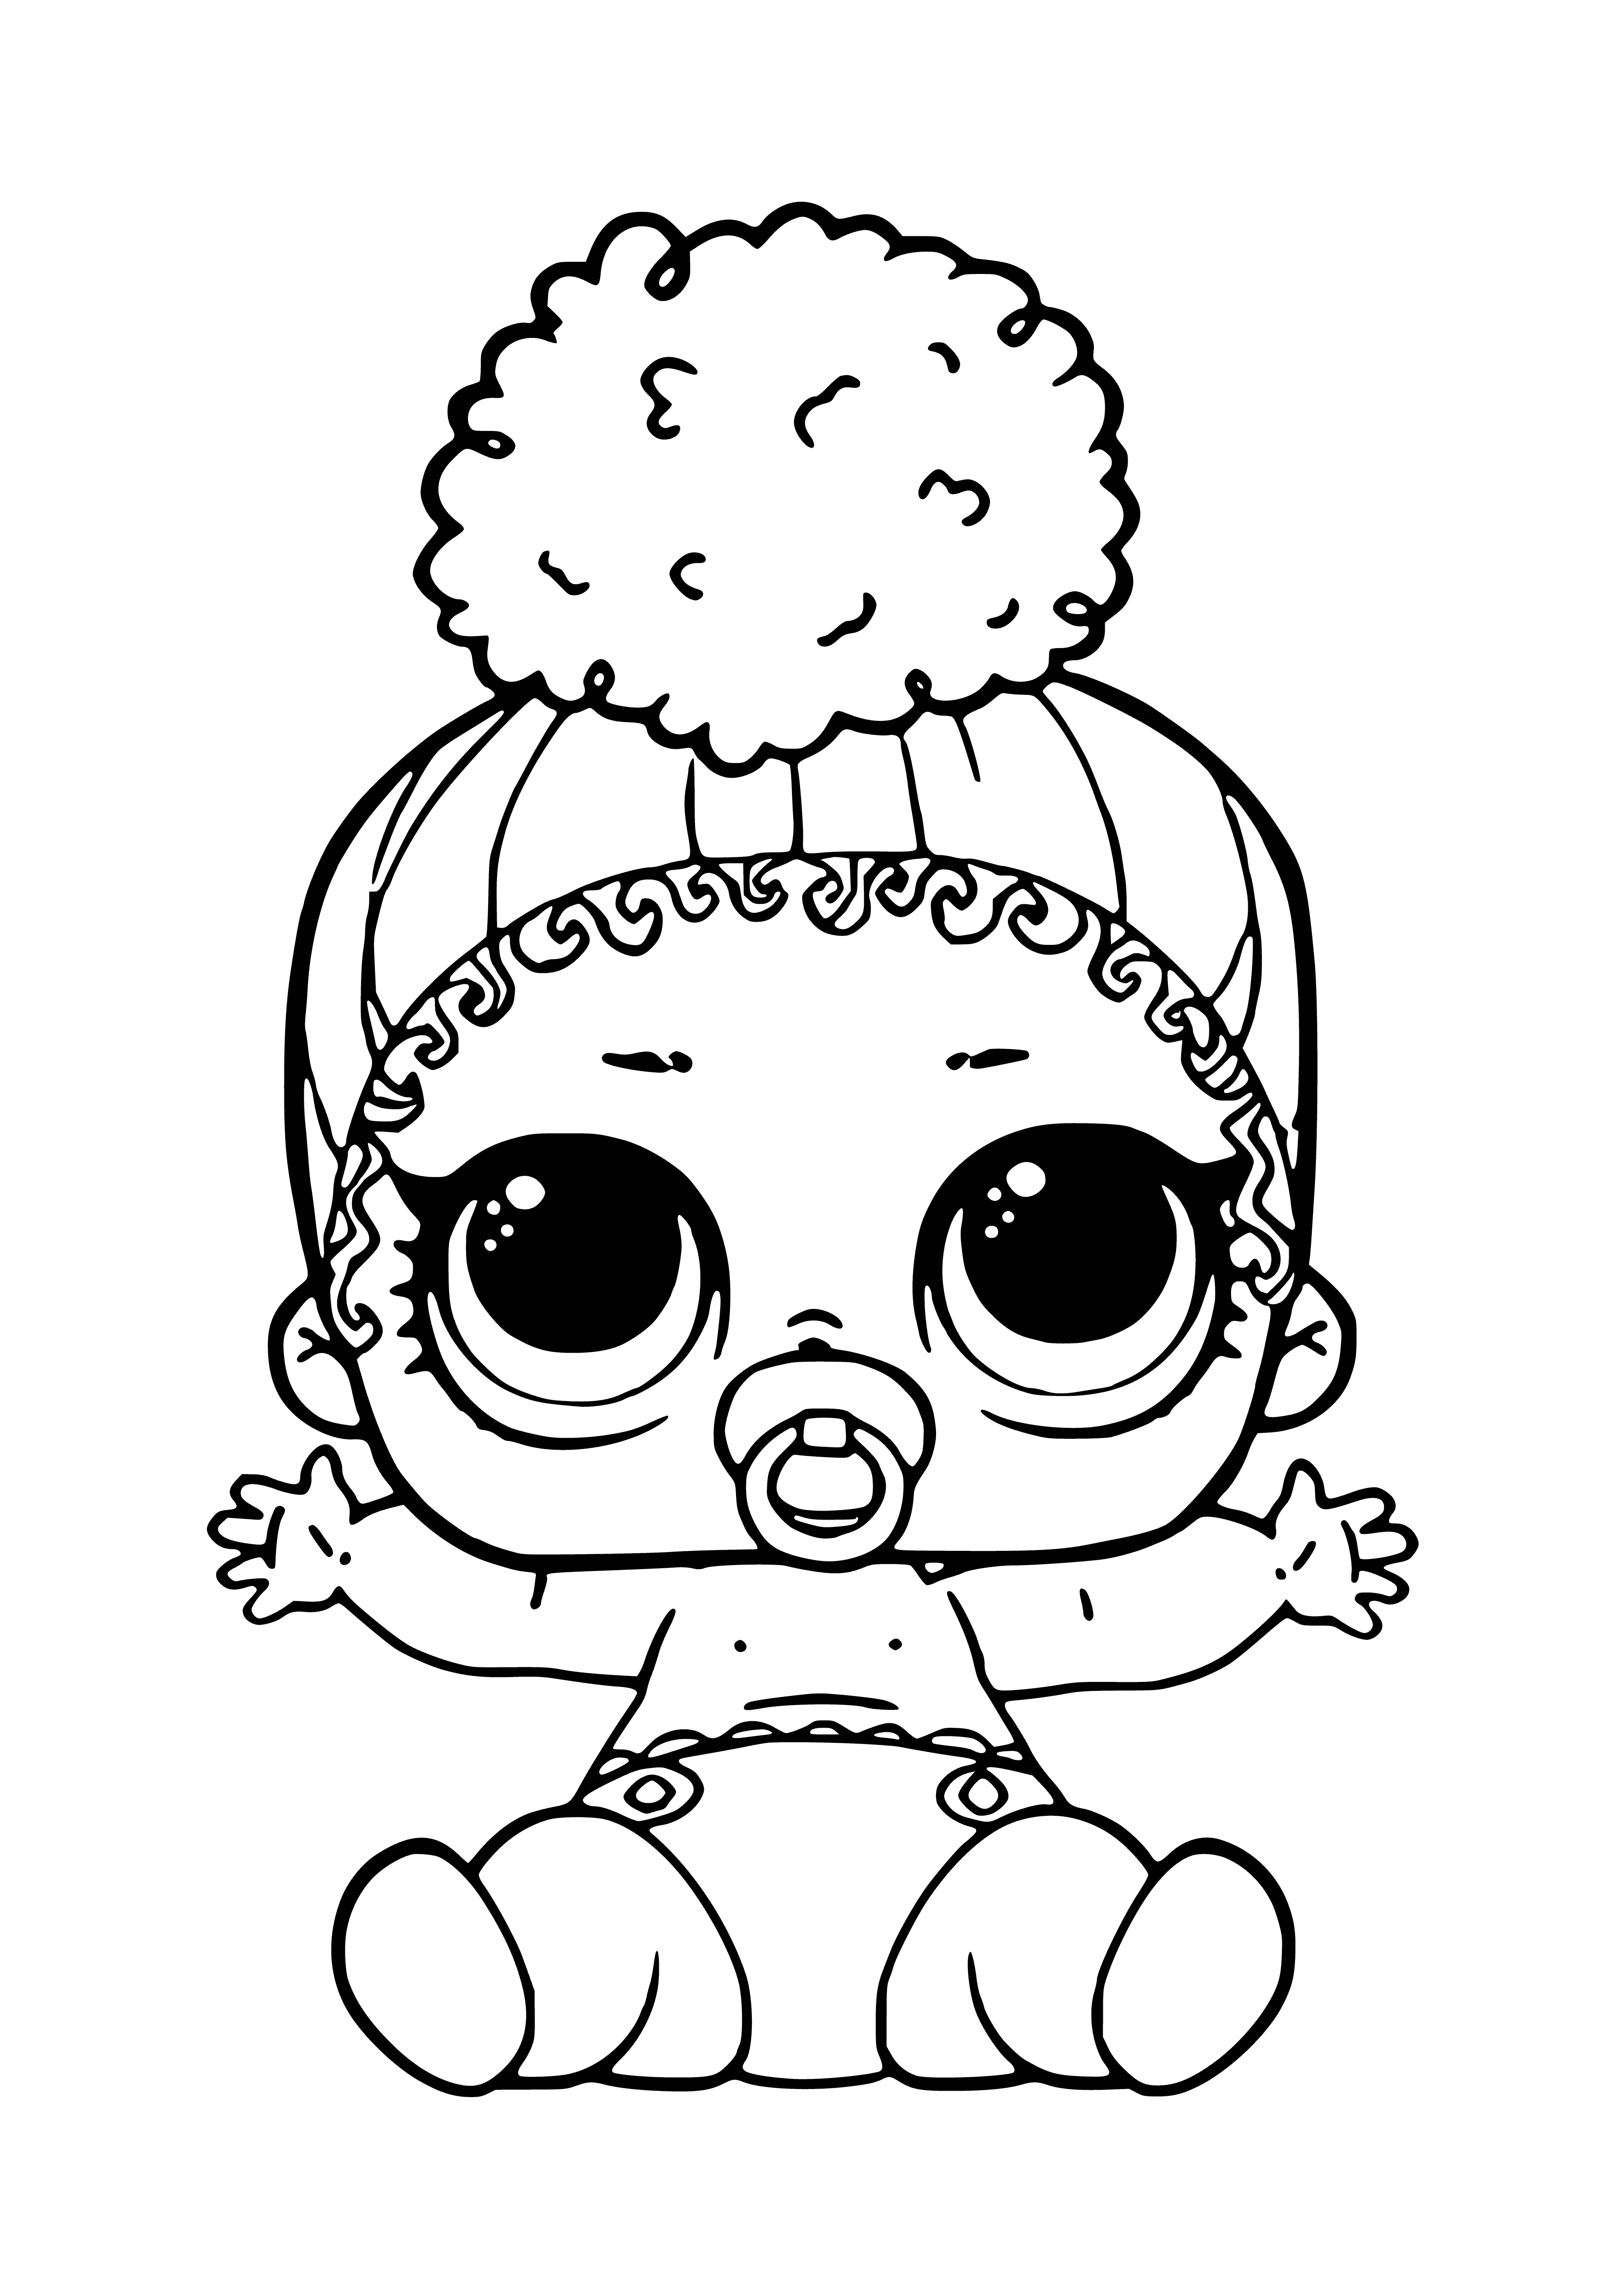 coloring page: Child celebrates "touchdown" w/ dance in coloring page; using toy football for playtime fun!